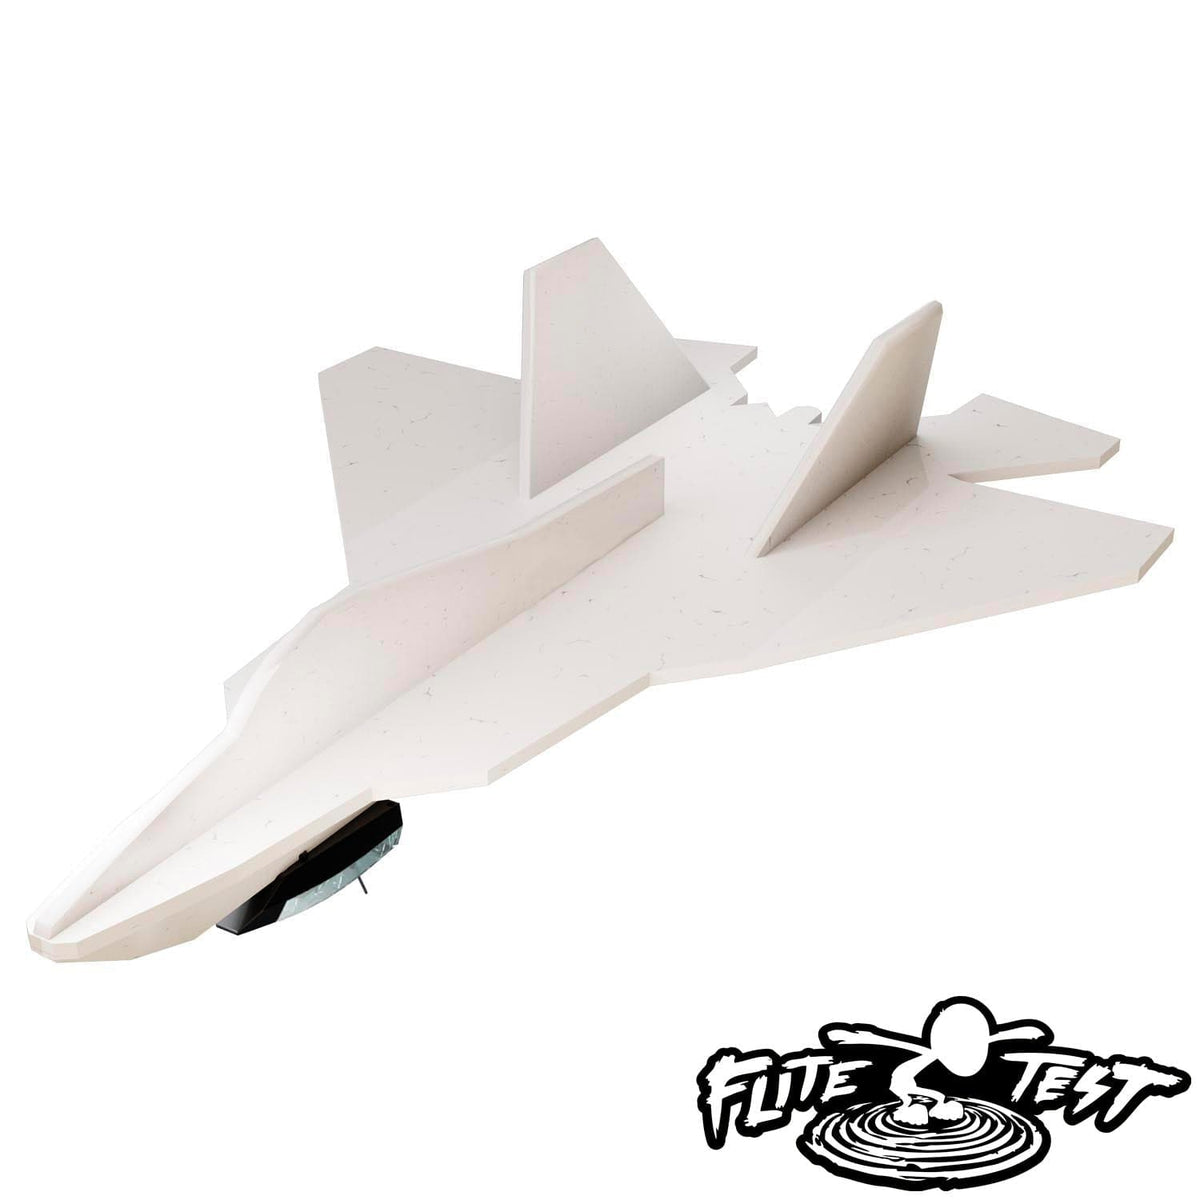 PowerUp 4.0: The Ultimate Bundle - Explore Entry Level RC Airplanes Using Sheet Foam & Balsa Wood. PowerUp 4.0, Paper Plane Model Book & Accessories